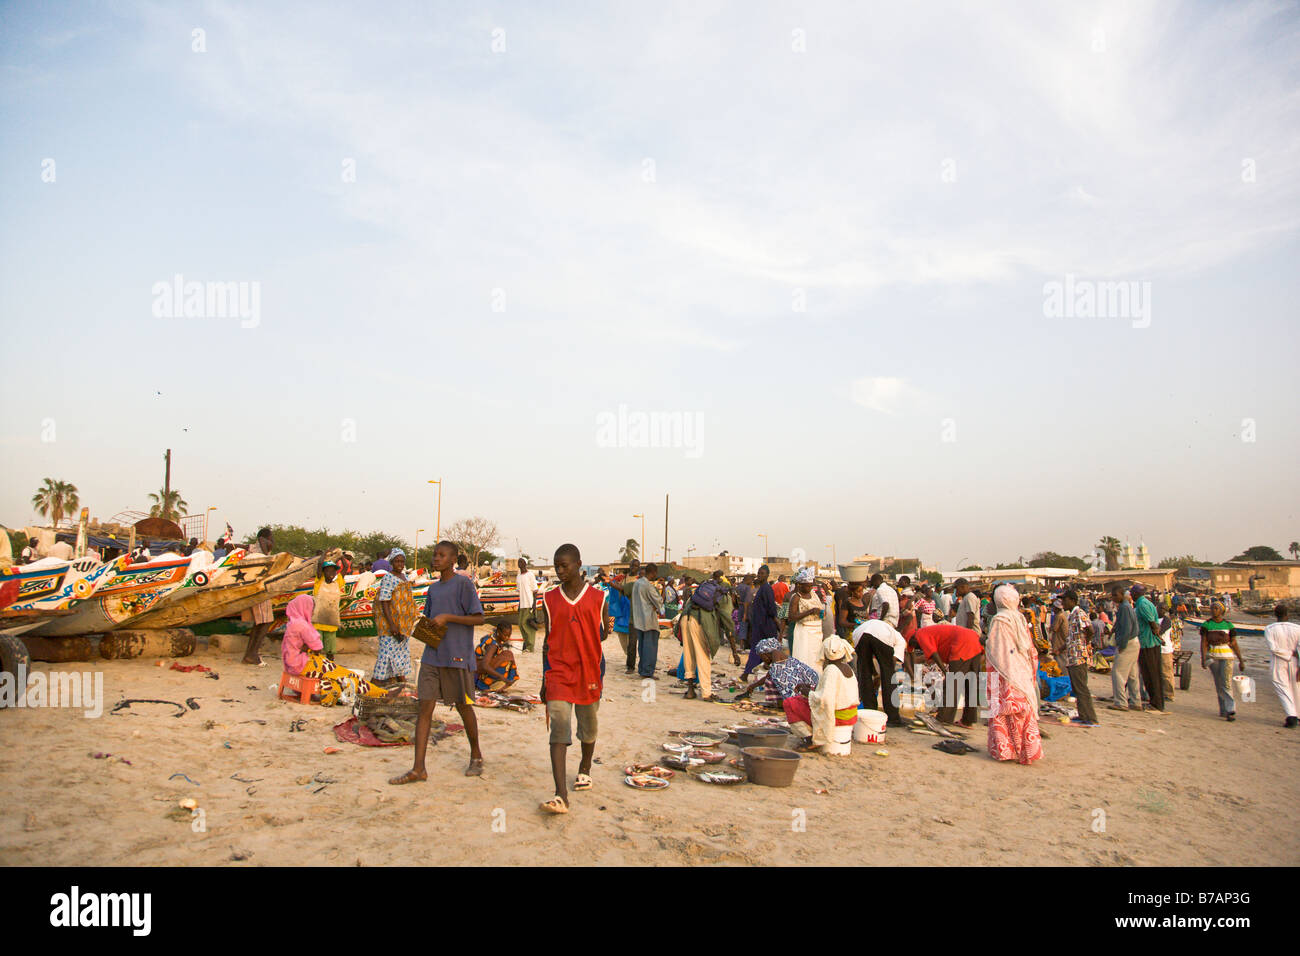 This beachside fish market in Senegal's capital city of Dakar is a typical scene in this coastal West African country. Stock Photo